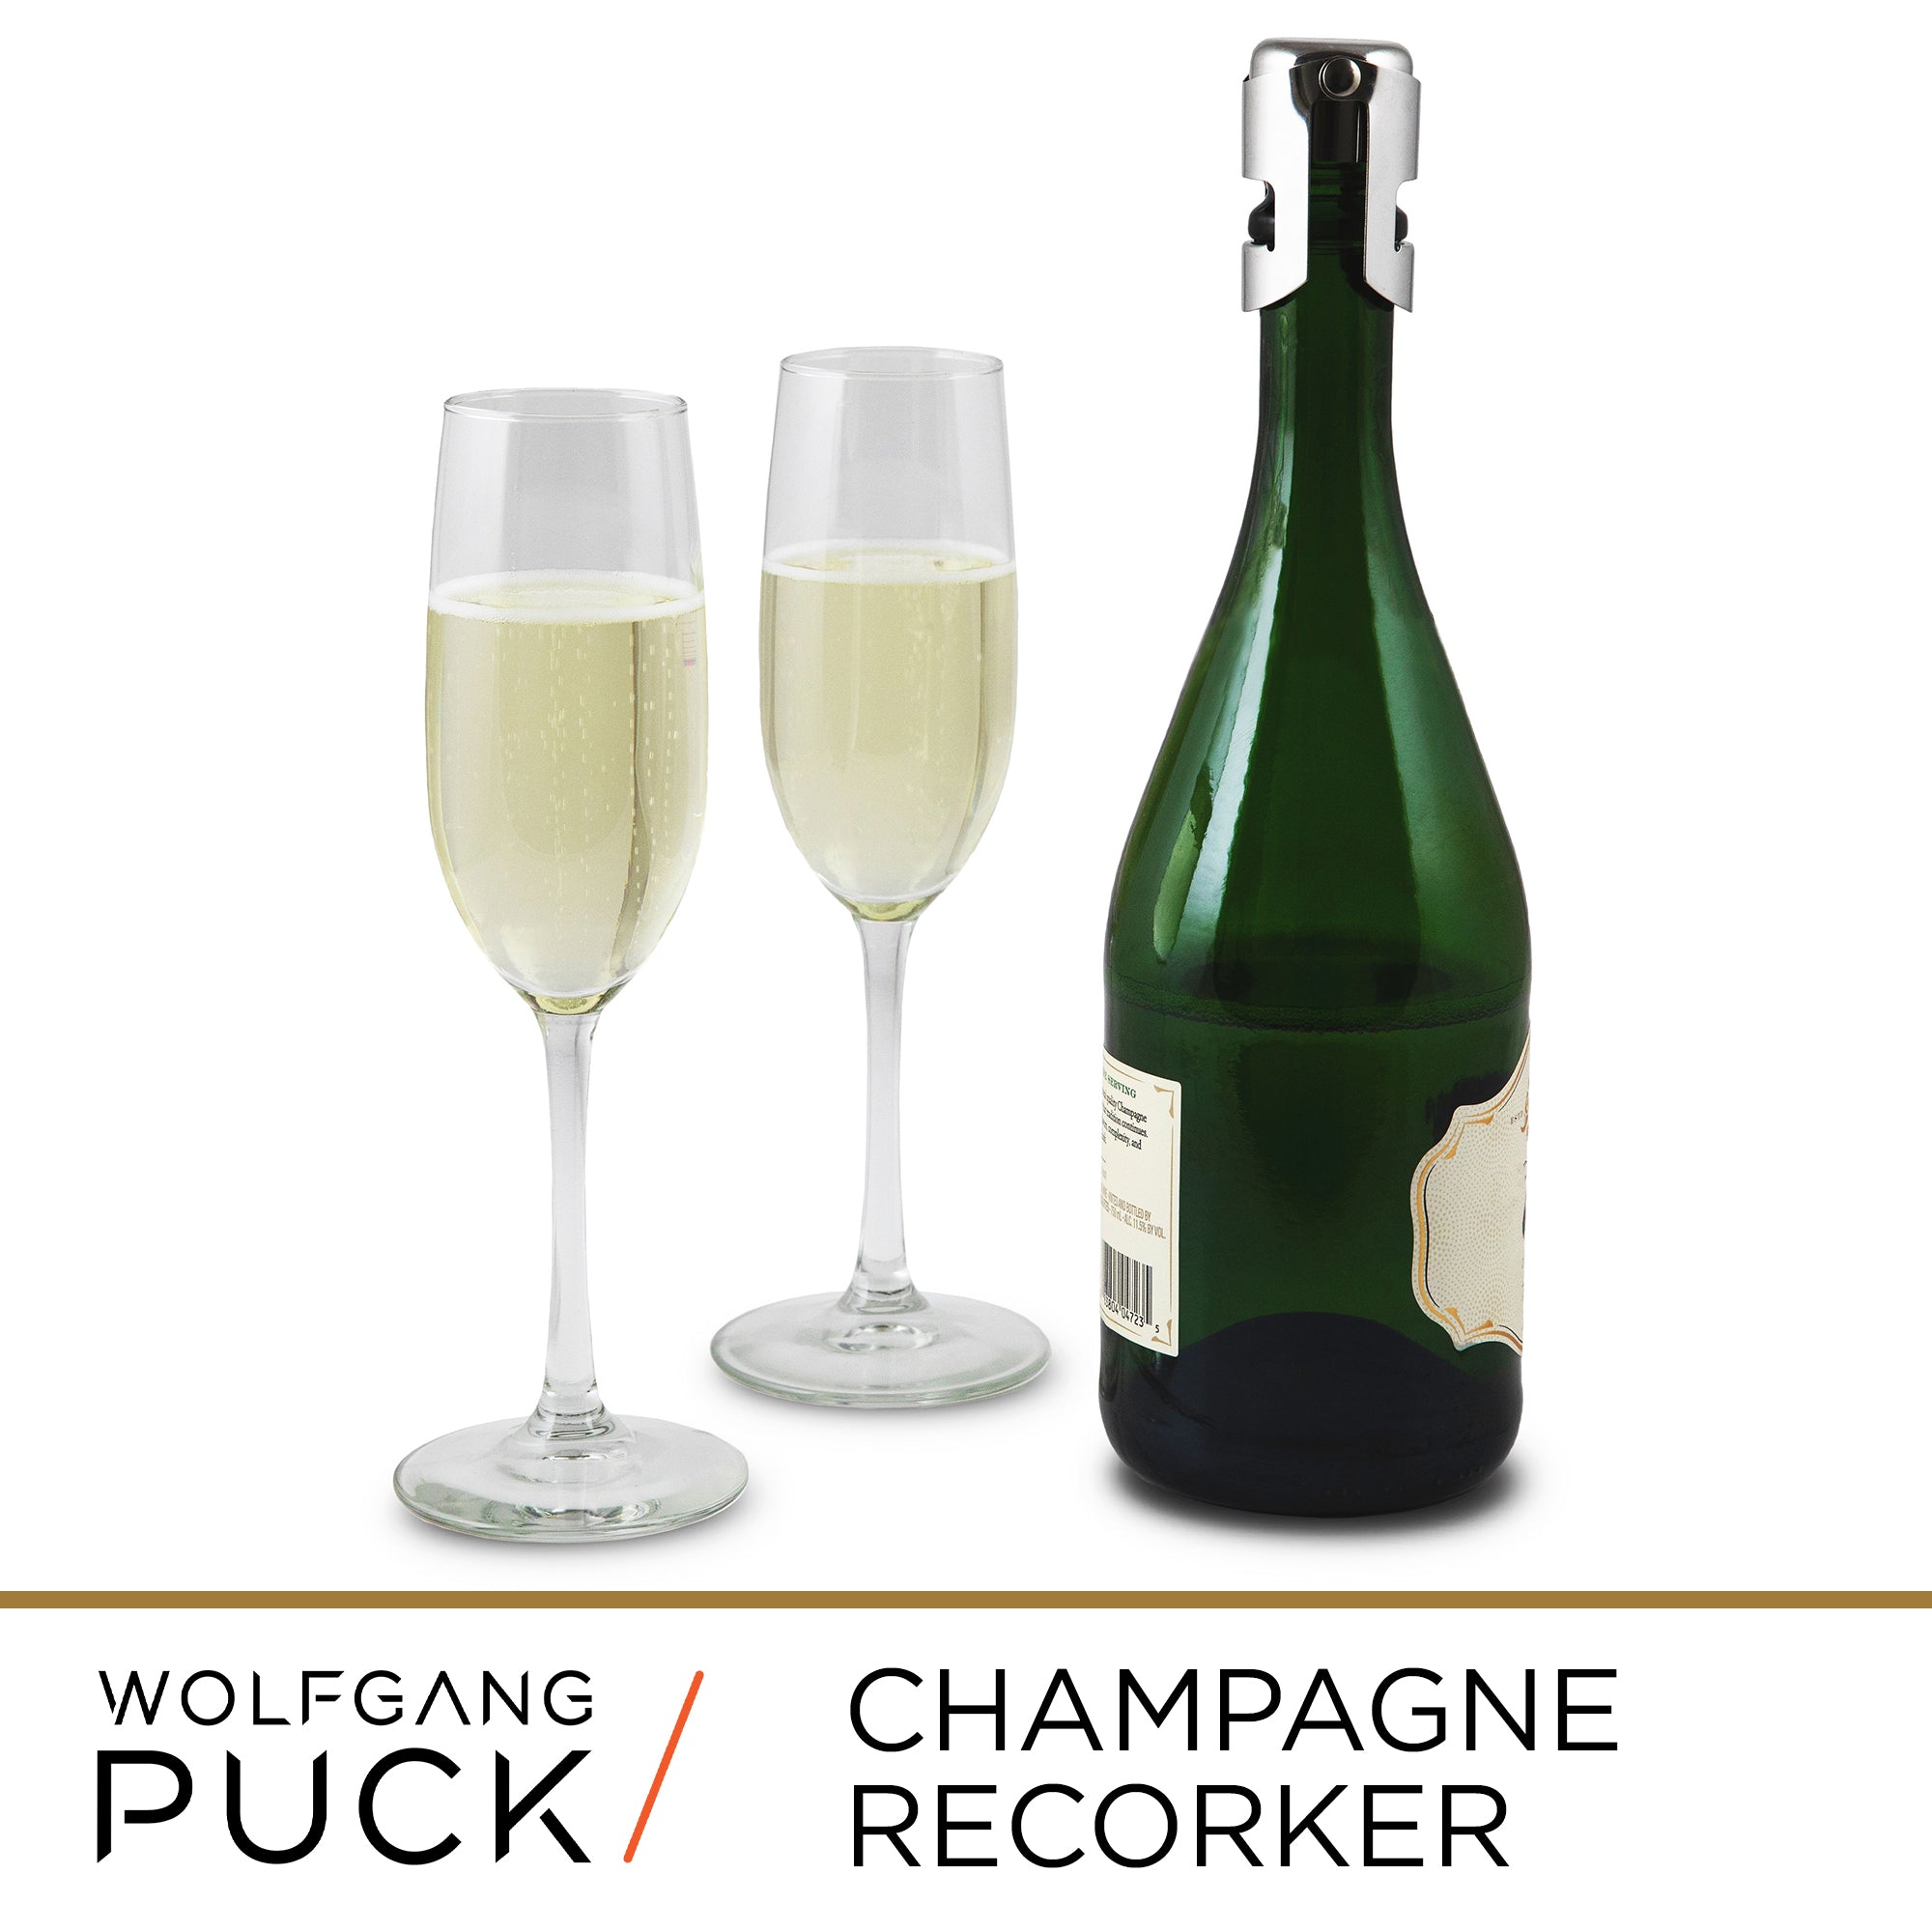 Wolfgang Puck 6-piece wine tool set with champagne recorker